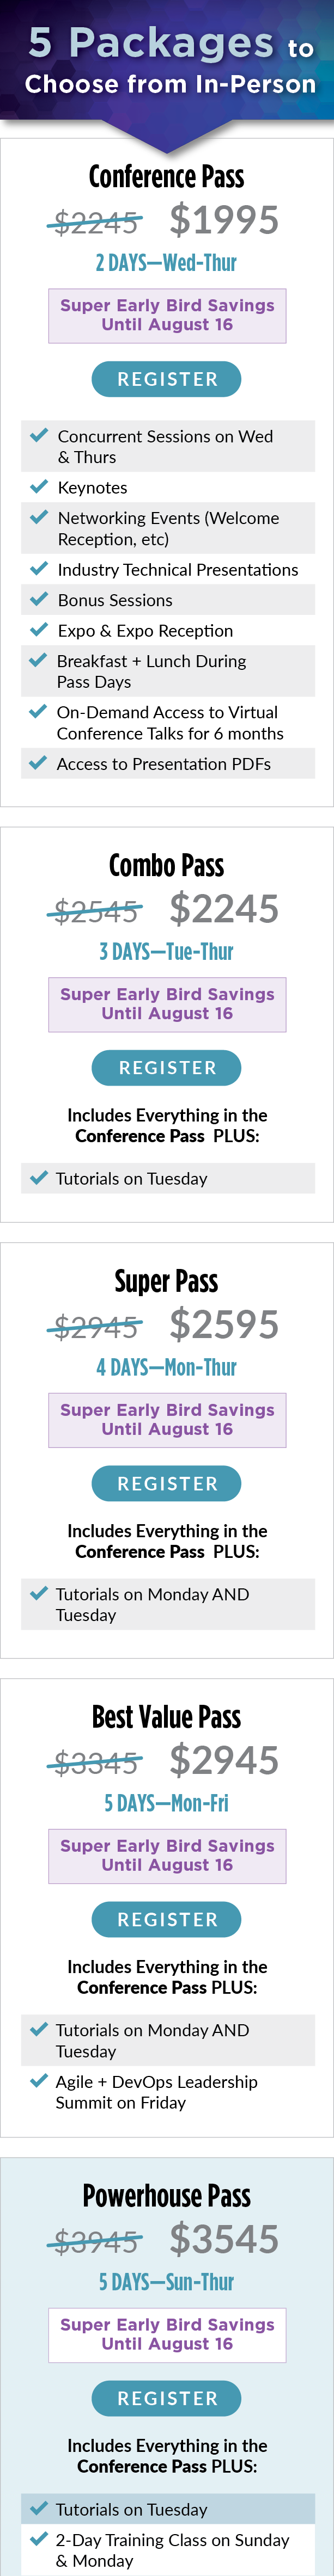 Mobile In-Person Passes